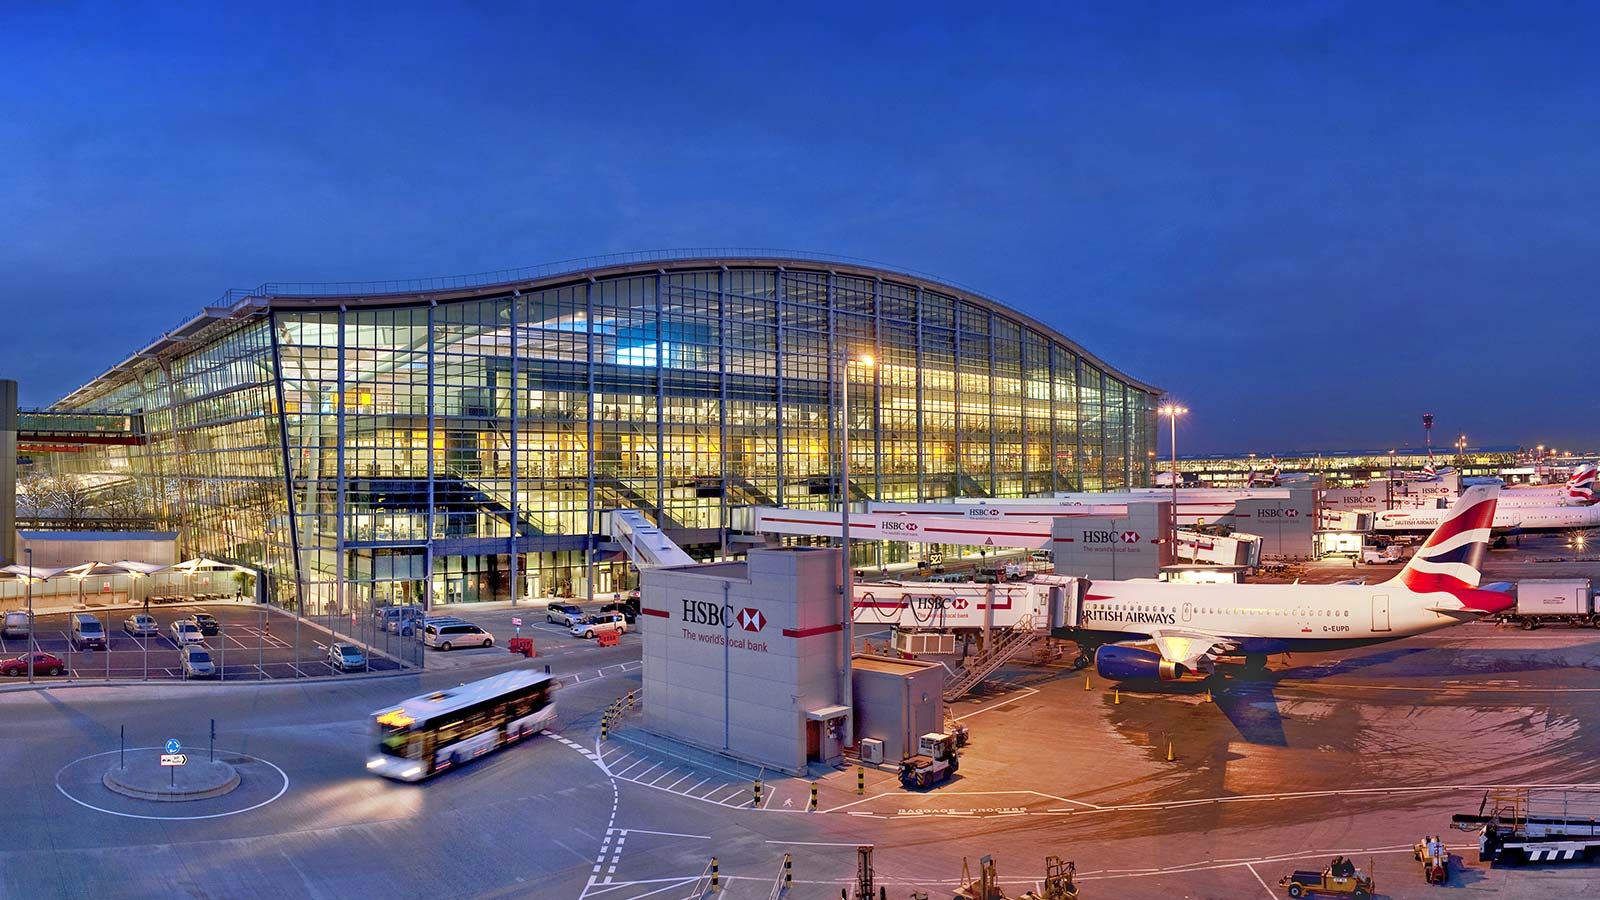 Parked Planes, London's Heathrow Terminal 5 - Mace Group